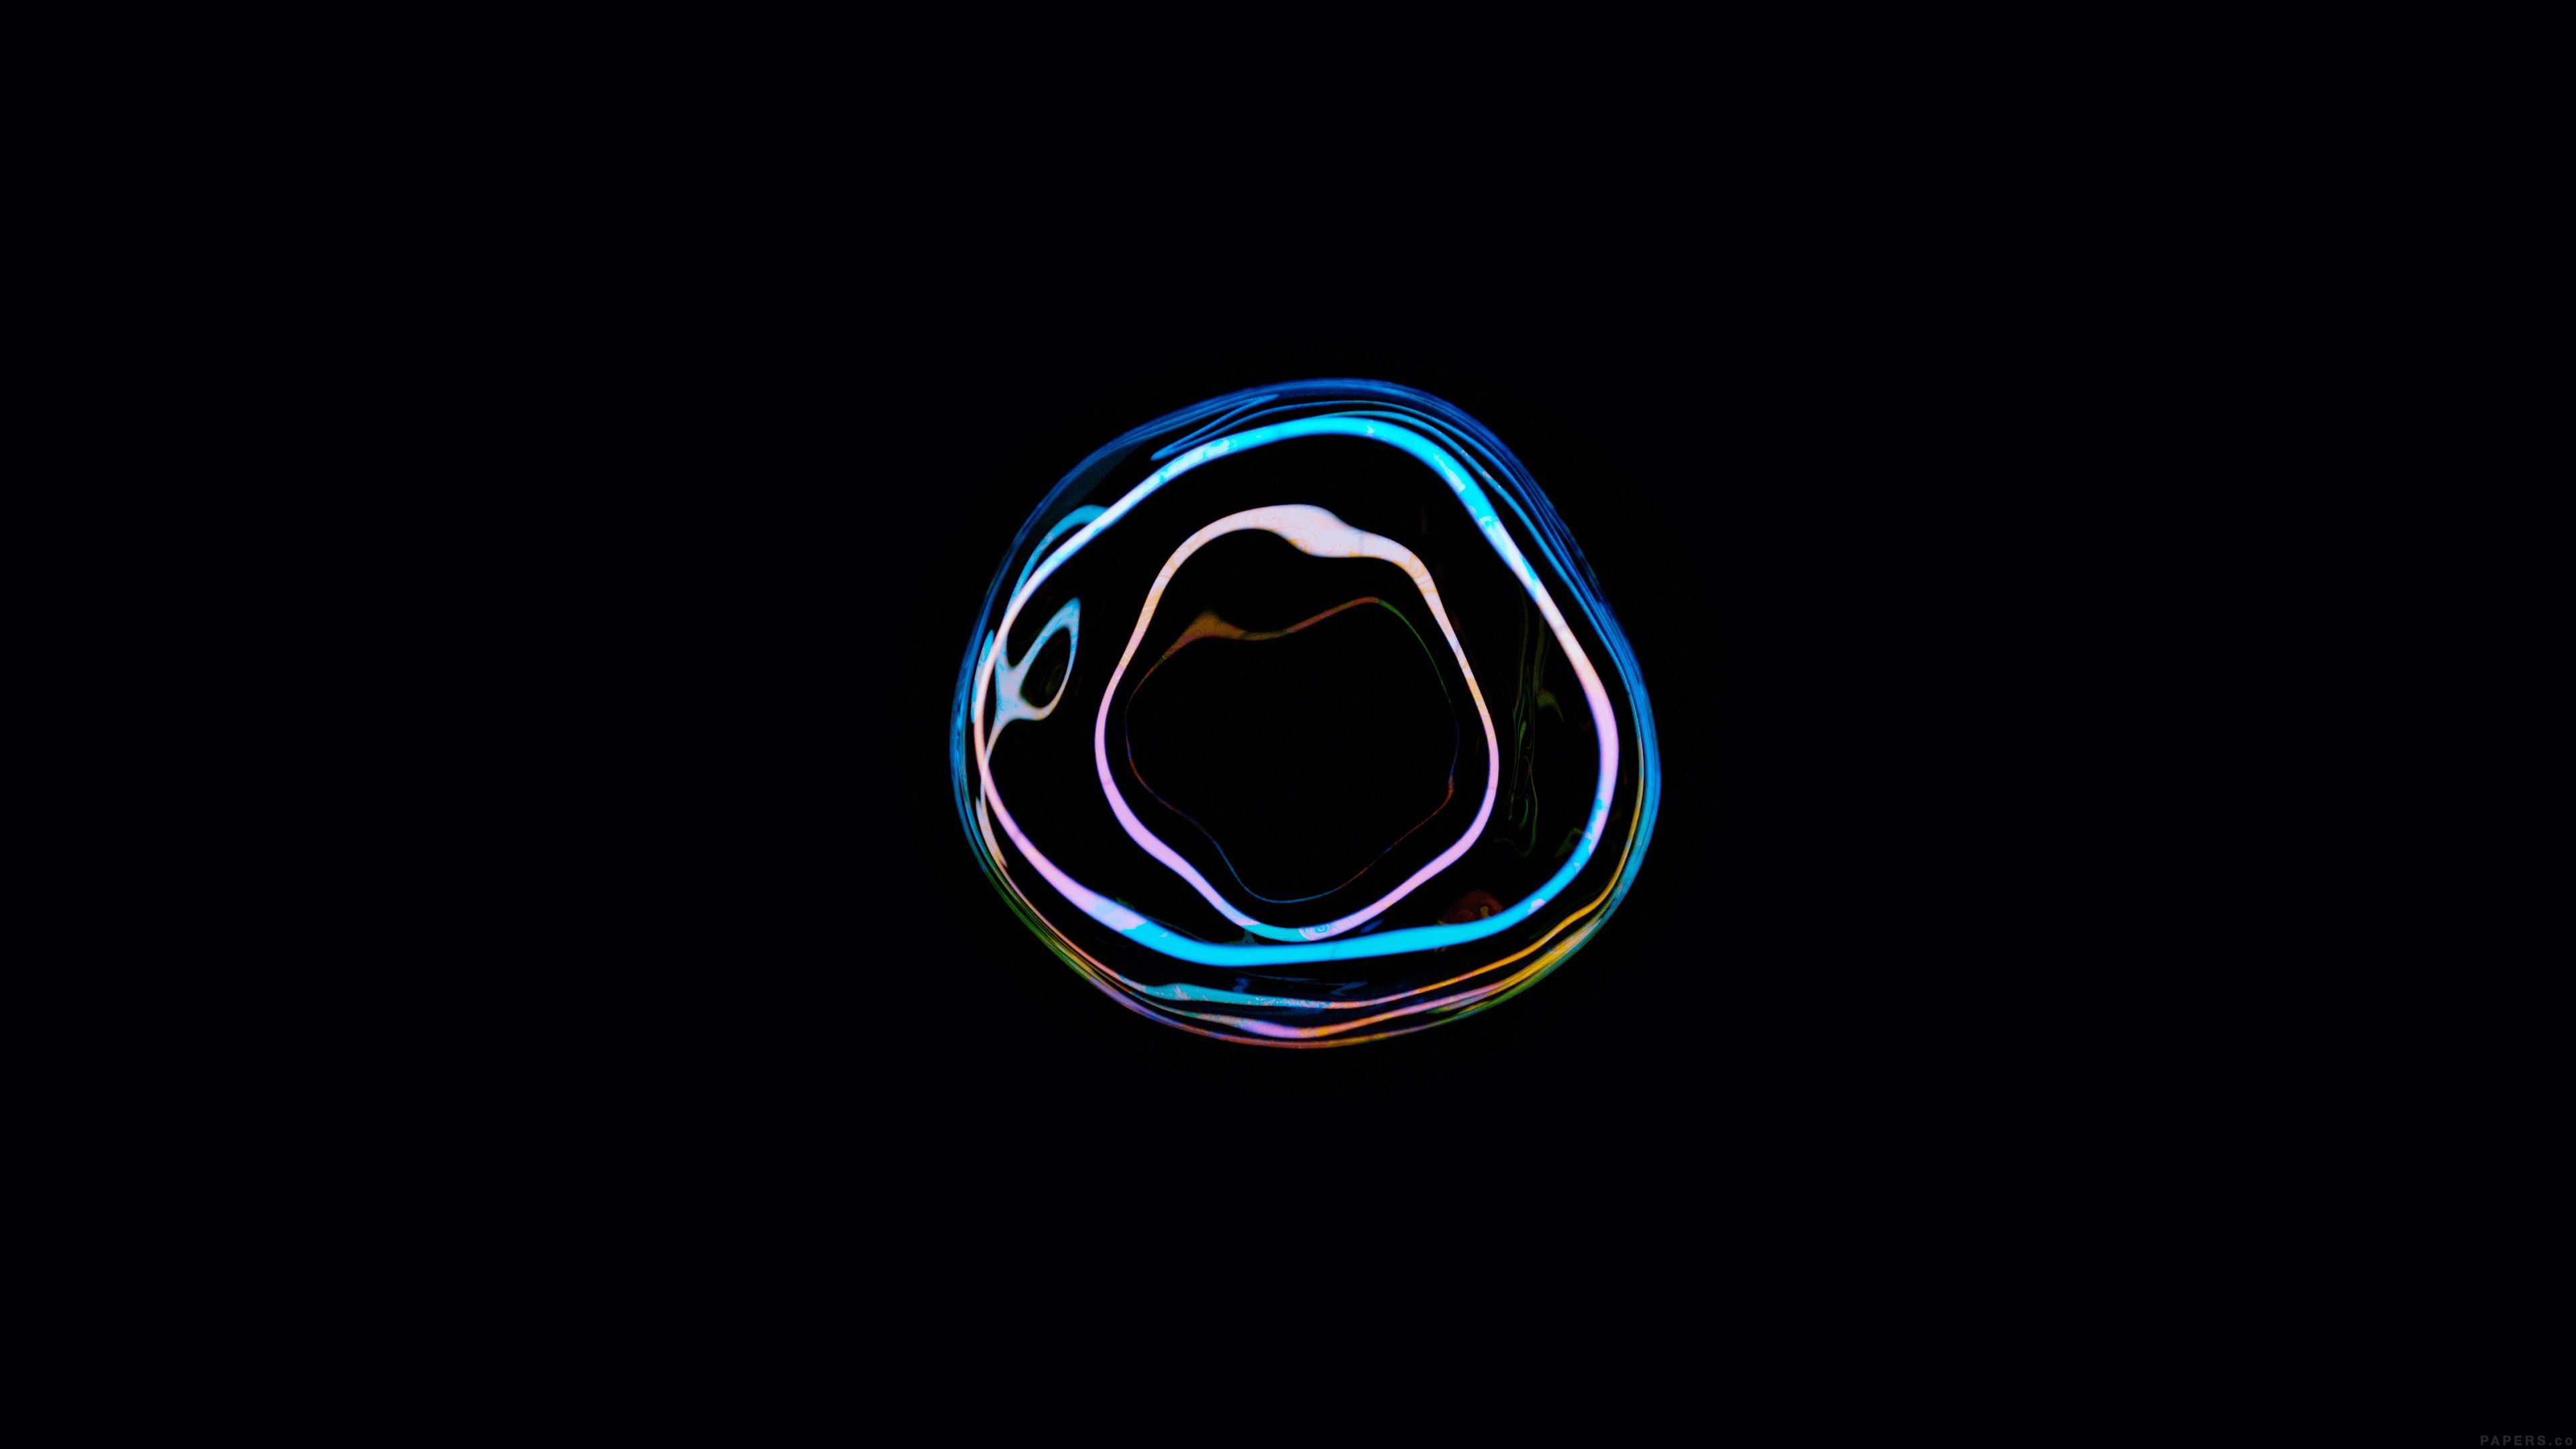 A soap bubble on a black background - Apple Watch